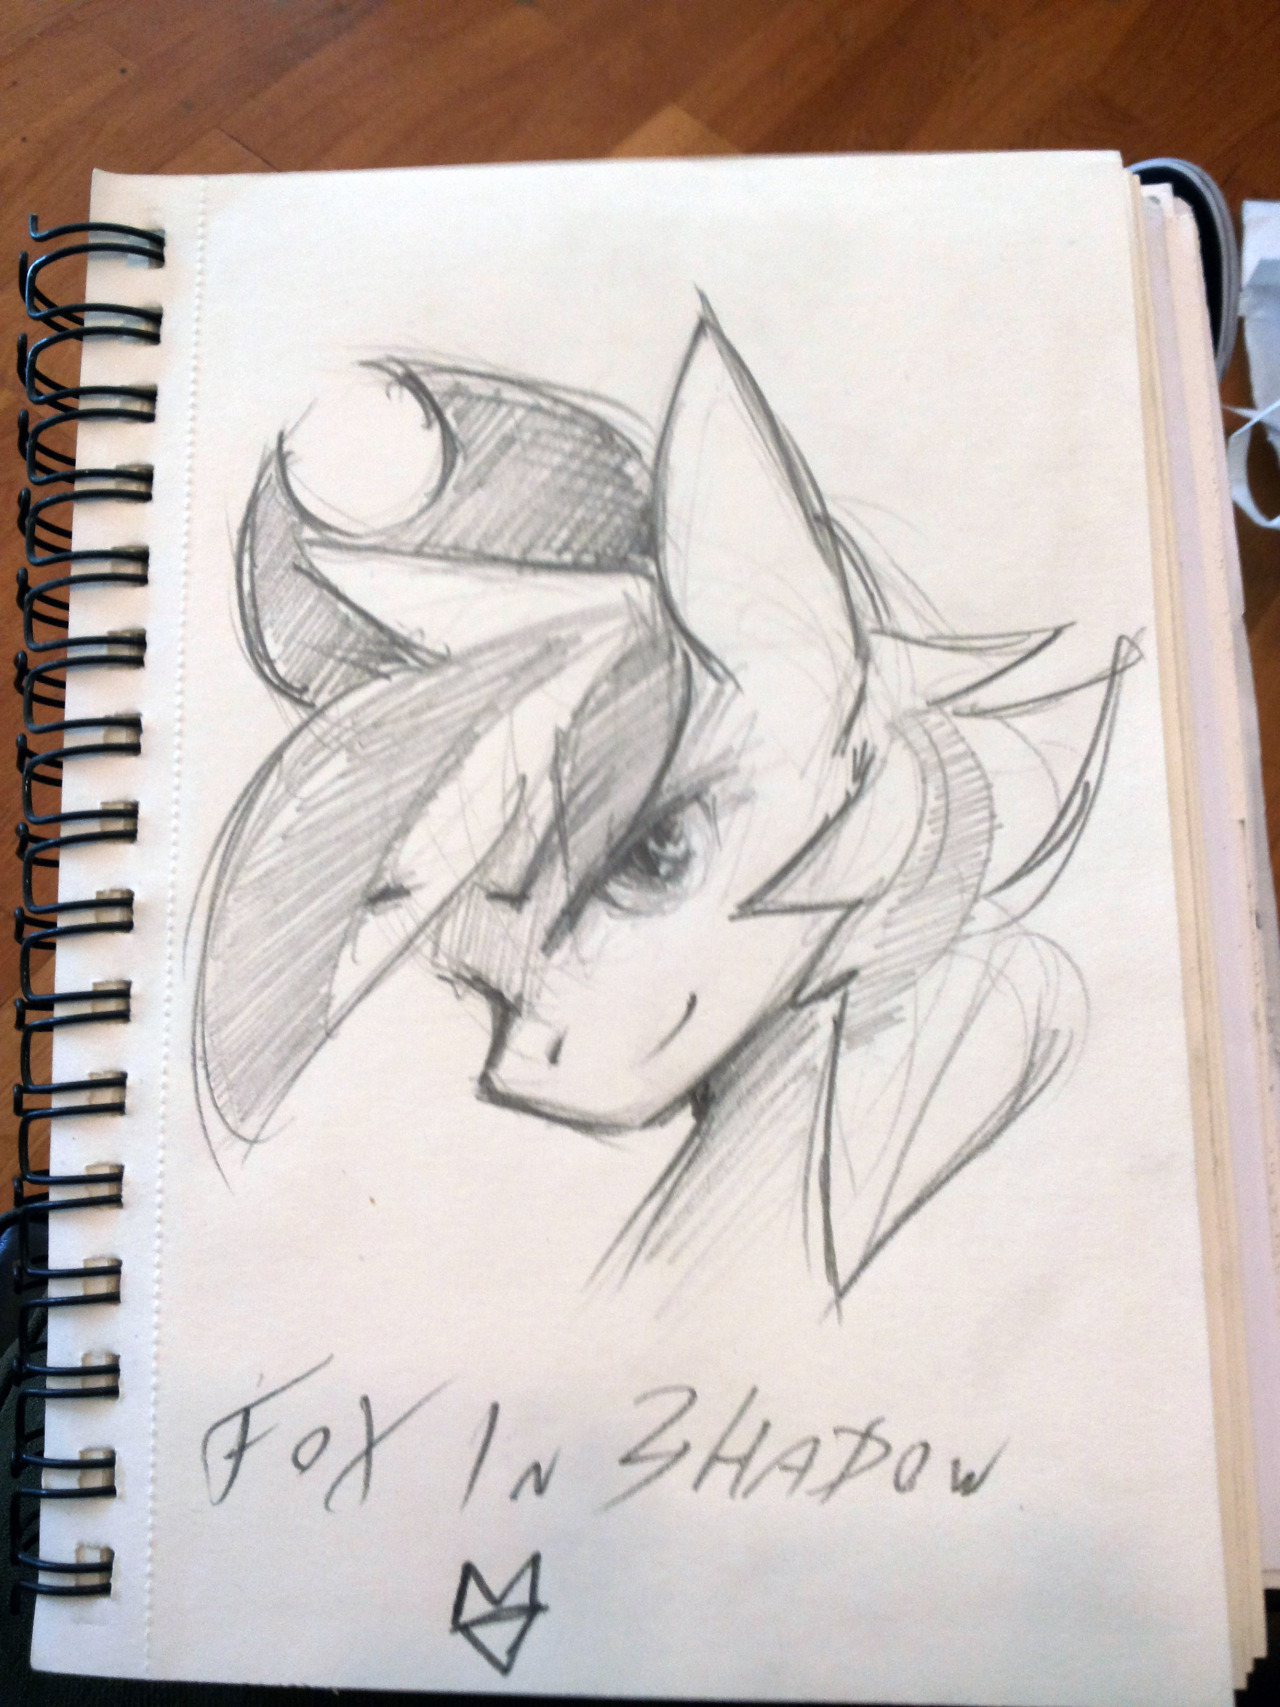 Here are all the sketches I gave away for free during the two days of Galacon 2015.The